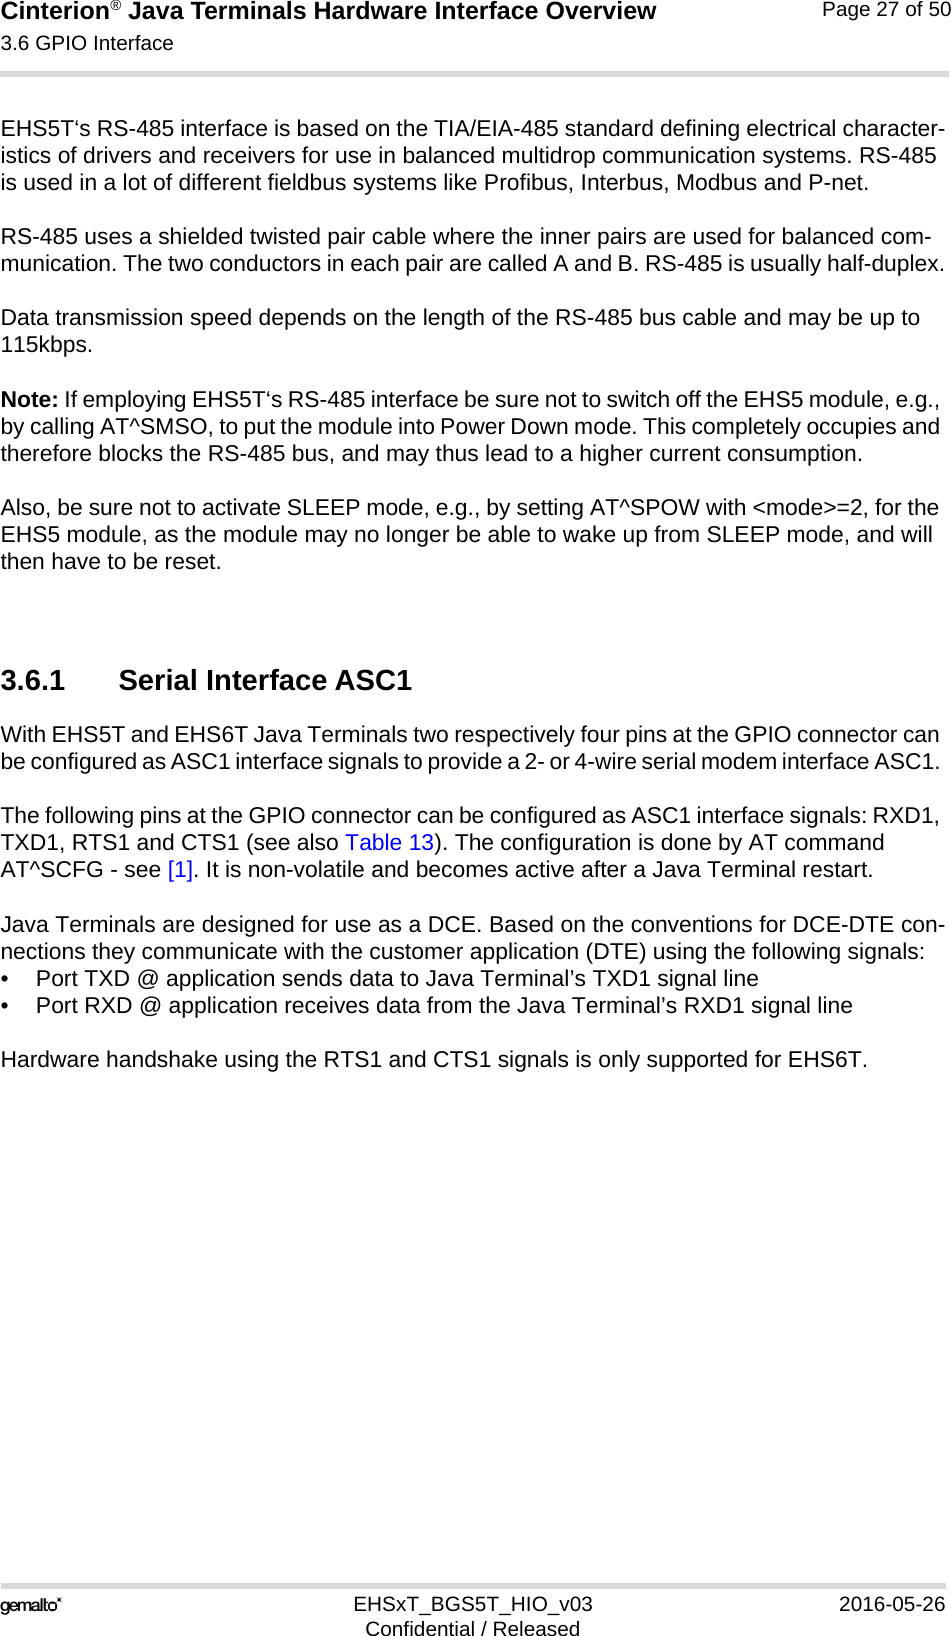 Cinterion® Java Terminals Hardware Interface Overview3.6 GPIO Interface39EHSxT_BGS5T_HIO_v03 2016-05-26Confidential / ReleasedPage 27 of 50EHS5T‘s RS-485 interface is based on the TIA/EIA-485 standard defining electrical character-istics of drivers and receivers for use in balanced multidrop communication systems. RS-485 is used in a lot of different fieldbus systems like Profibus, Interbus, Modbus and P-net.RS-485 uses a shielded twisted pair cable where the inner pairs are used for balanced com-munication. The two conductors in each pair are called A and B. RS-485 is usually half-duplex.Data transmission speed depends on the length of the RS-485 bus cable and may be up to 115kbps.Note: If employing EHS5T‘s RS-485 interface be sure not to switch off the EHS5 module, e.g., by calling AT^SMSO, to put the module into Power Down mode. This completely occupies and therefore blocks the RS-485 bus, and may thus lead to a higher current consumption. Also, be sure not to activate SLEEP mode, e.g., by setting AT^SPOW with &lt;mode&gt;=2, for the EHS5 module, as the module may no longer be able to wake up from SLEEP mode, and will then have to be reset. 3.6.1 Serial Interface ASC1With EHS5T and EHS6T Java Terminals two respectively four pins at the GPIO connector can be configured as ASC1 interface signals to provide a 2- or 4-wire serial modem interface ASC1. The following pins at the GPIO connector can be configured as ASC1 interface signals: RXD1, TXD1, RTS1 and CTS1 (see also Table 13). The configuration is done by AT command AT^SCFG - see [1]. It is non-volatile and becomes active after a Java Terminal restart.Java Terminals are designed for use as a DCE. Based on the conventions for DCE-DTE con-nections they communicate with the customer application (DTE) using the following signals:• Port TXD @ application sends data to Java Terminal’s TXD1 signal line• Port RXD @ application receives data from the Java Terminal’s RXD1 signal lineHardware handshake using the RTS1 and CTS1 signals is only supported for EHS6T.